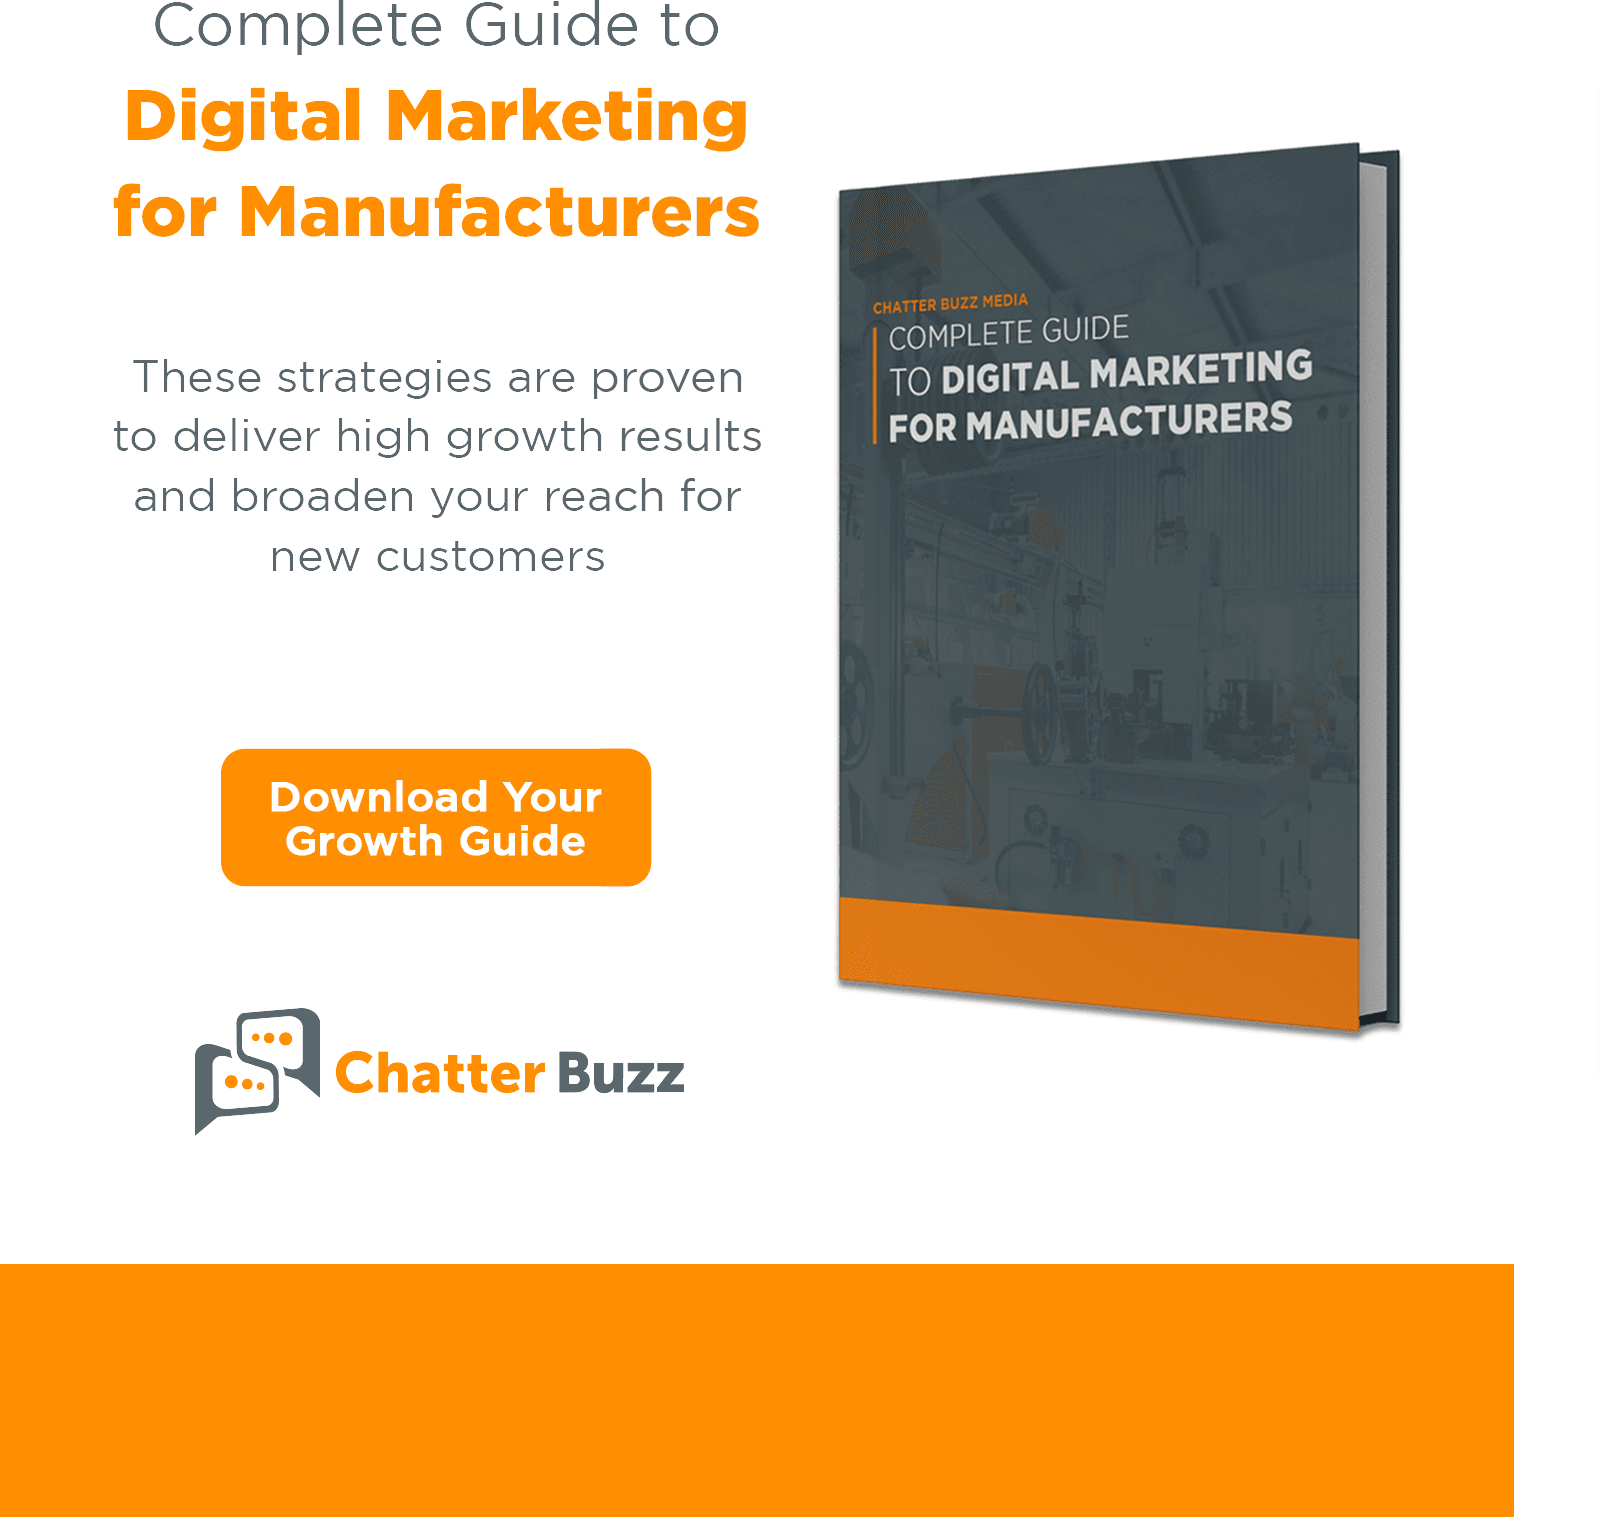 Complete Guide to Digital Marketing for Manufacturers